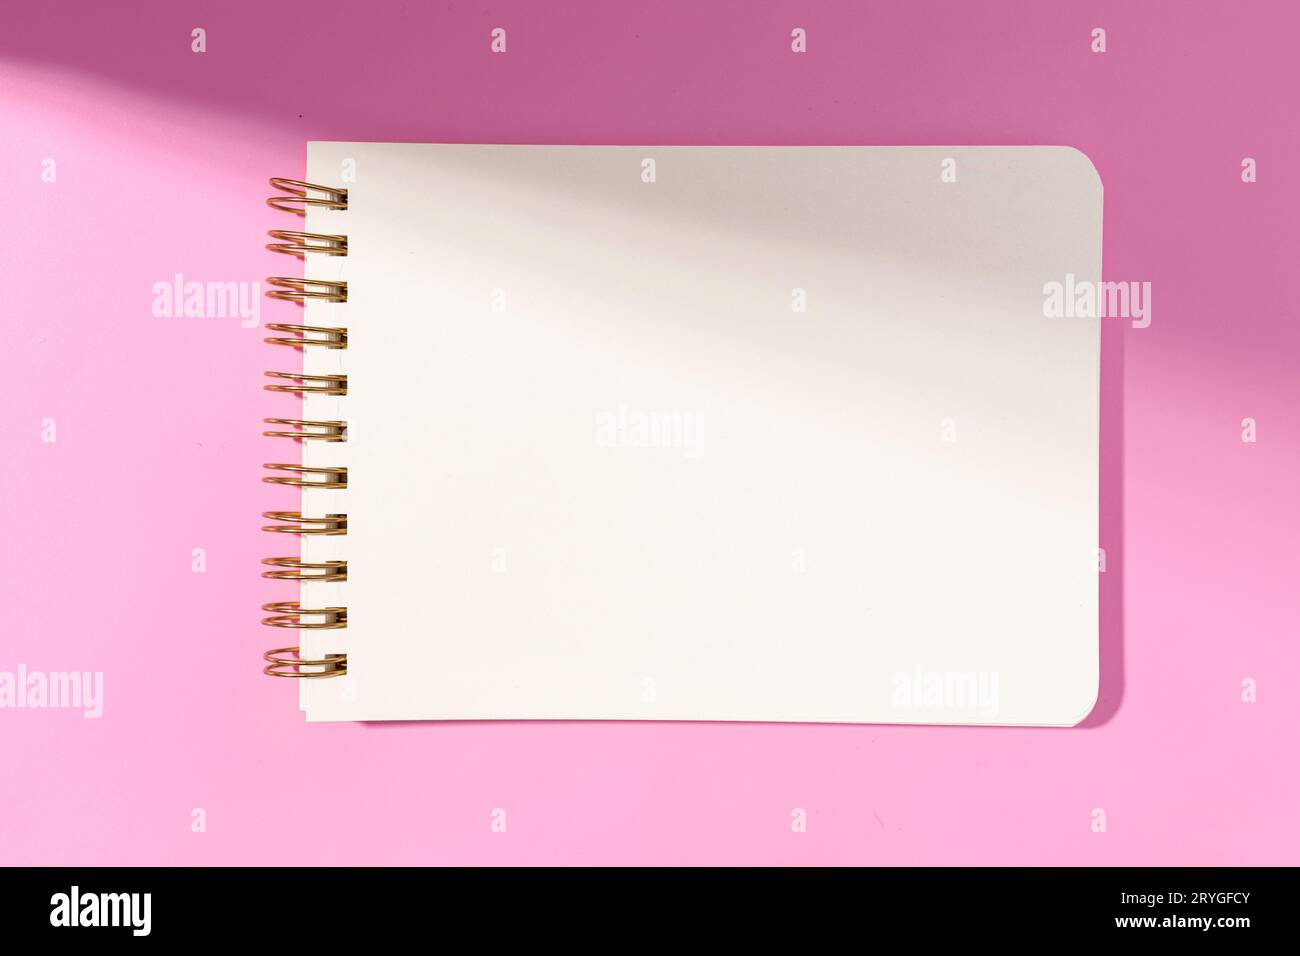 Blank paper notebook, pink flowers, golden stationery on marble